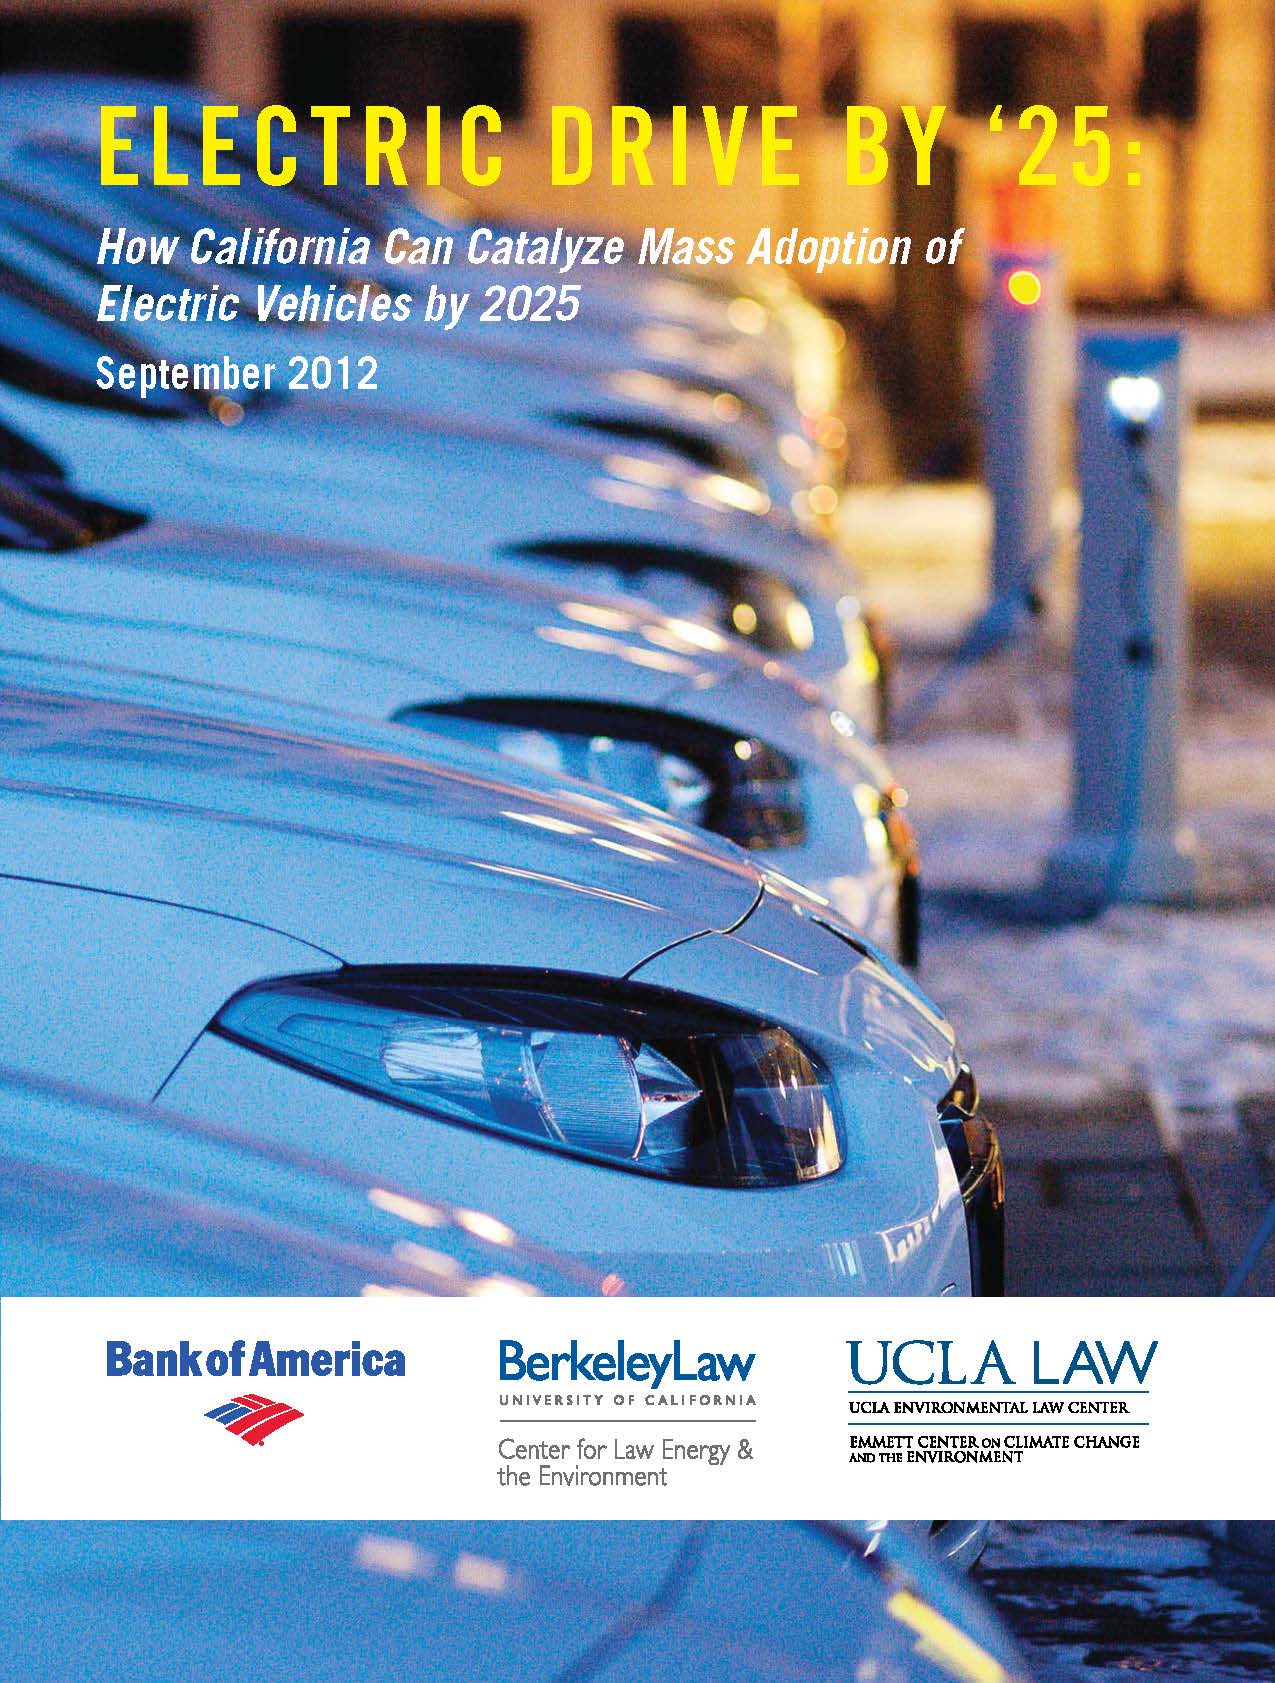 New Report on Electric Vehicle Policies & Capitol Hill Briefing Today